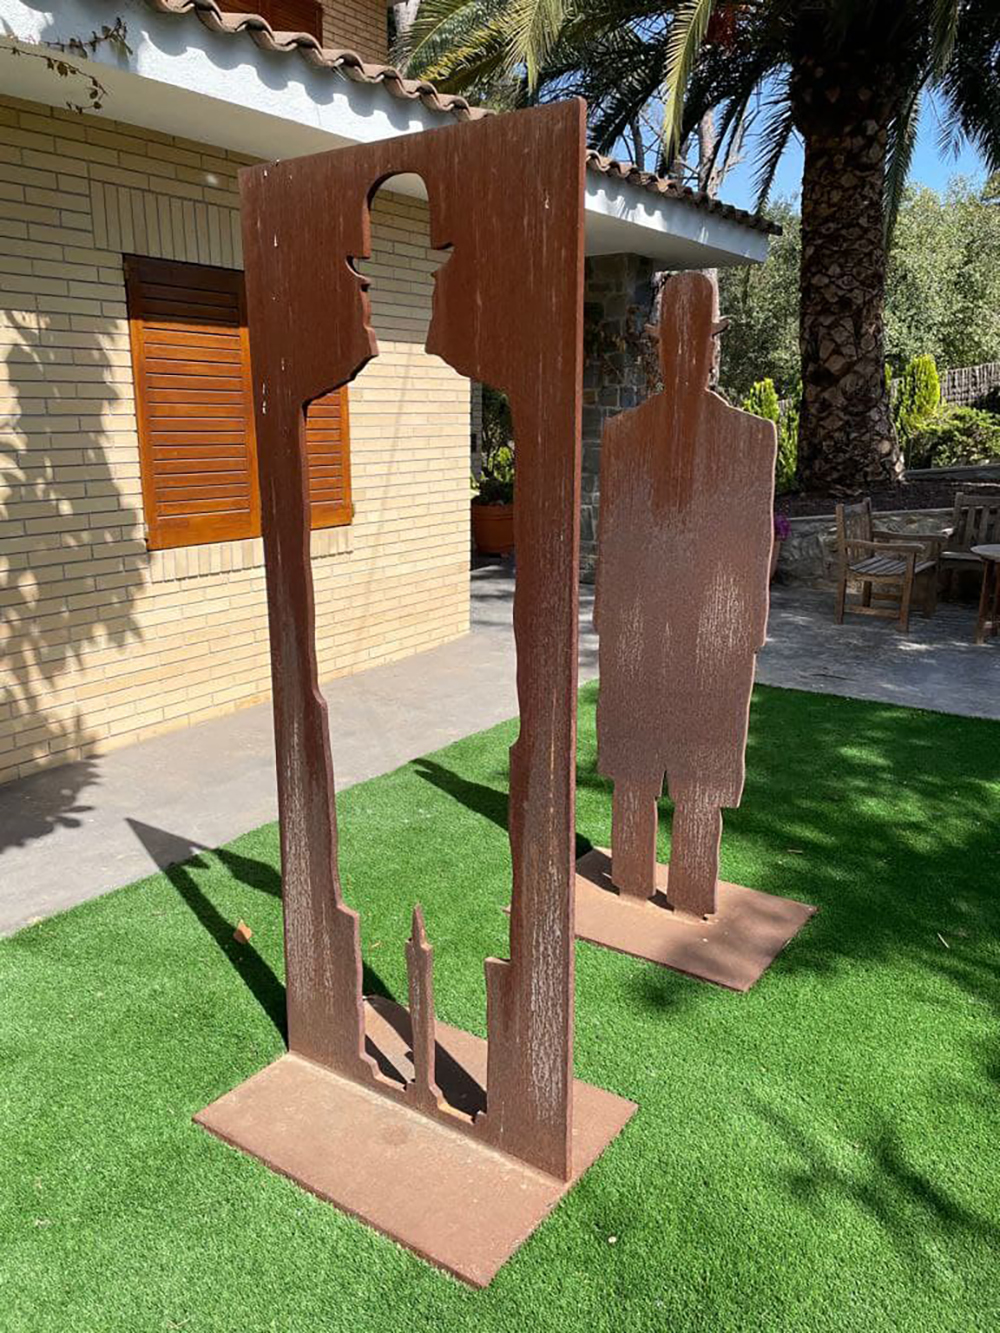 JOSÉ LUIS PASCUAL SAMARANCH (Barcelona, 1947). "Homage to Magritte". 2005. Corten steel. Size: 240 x - Image 9 of 11